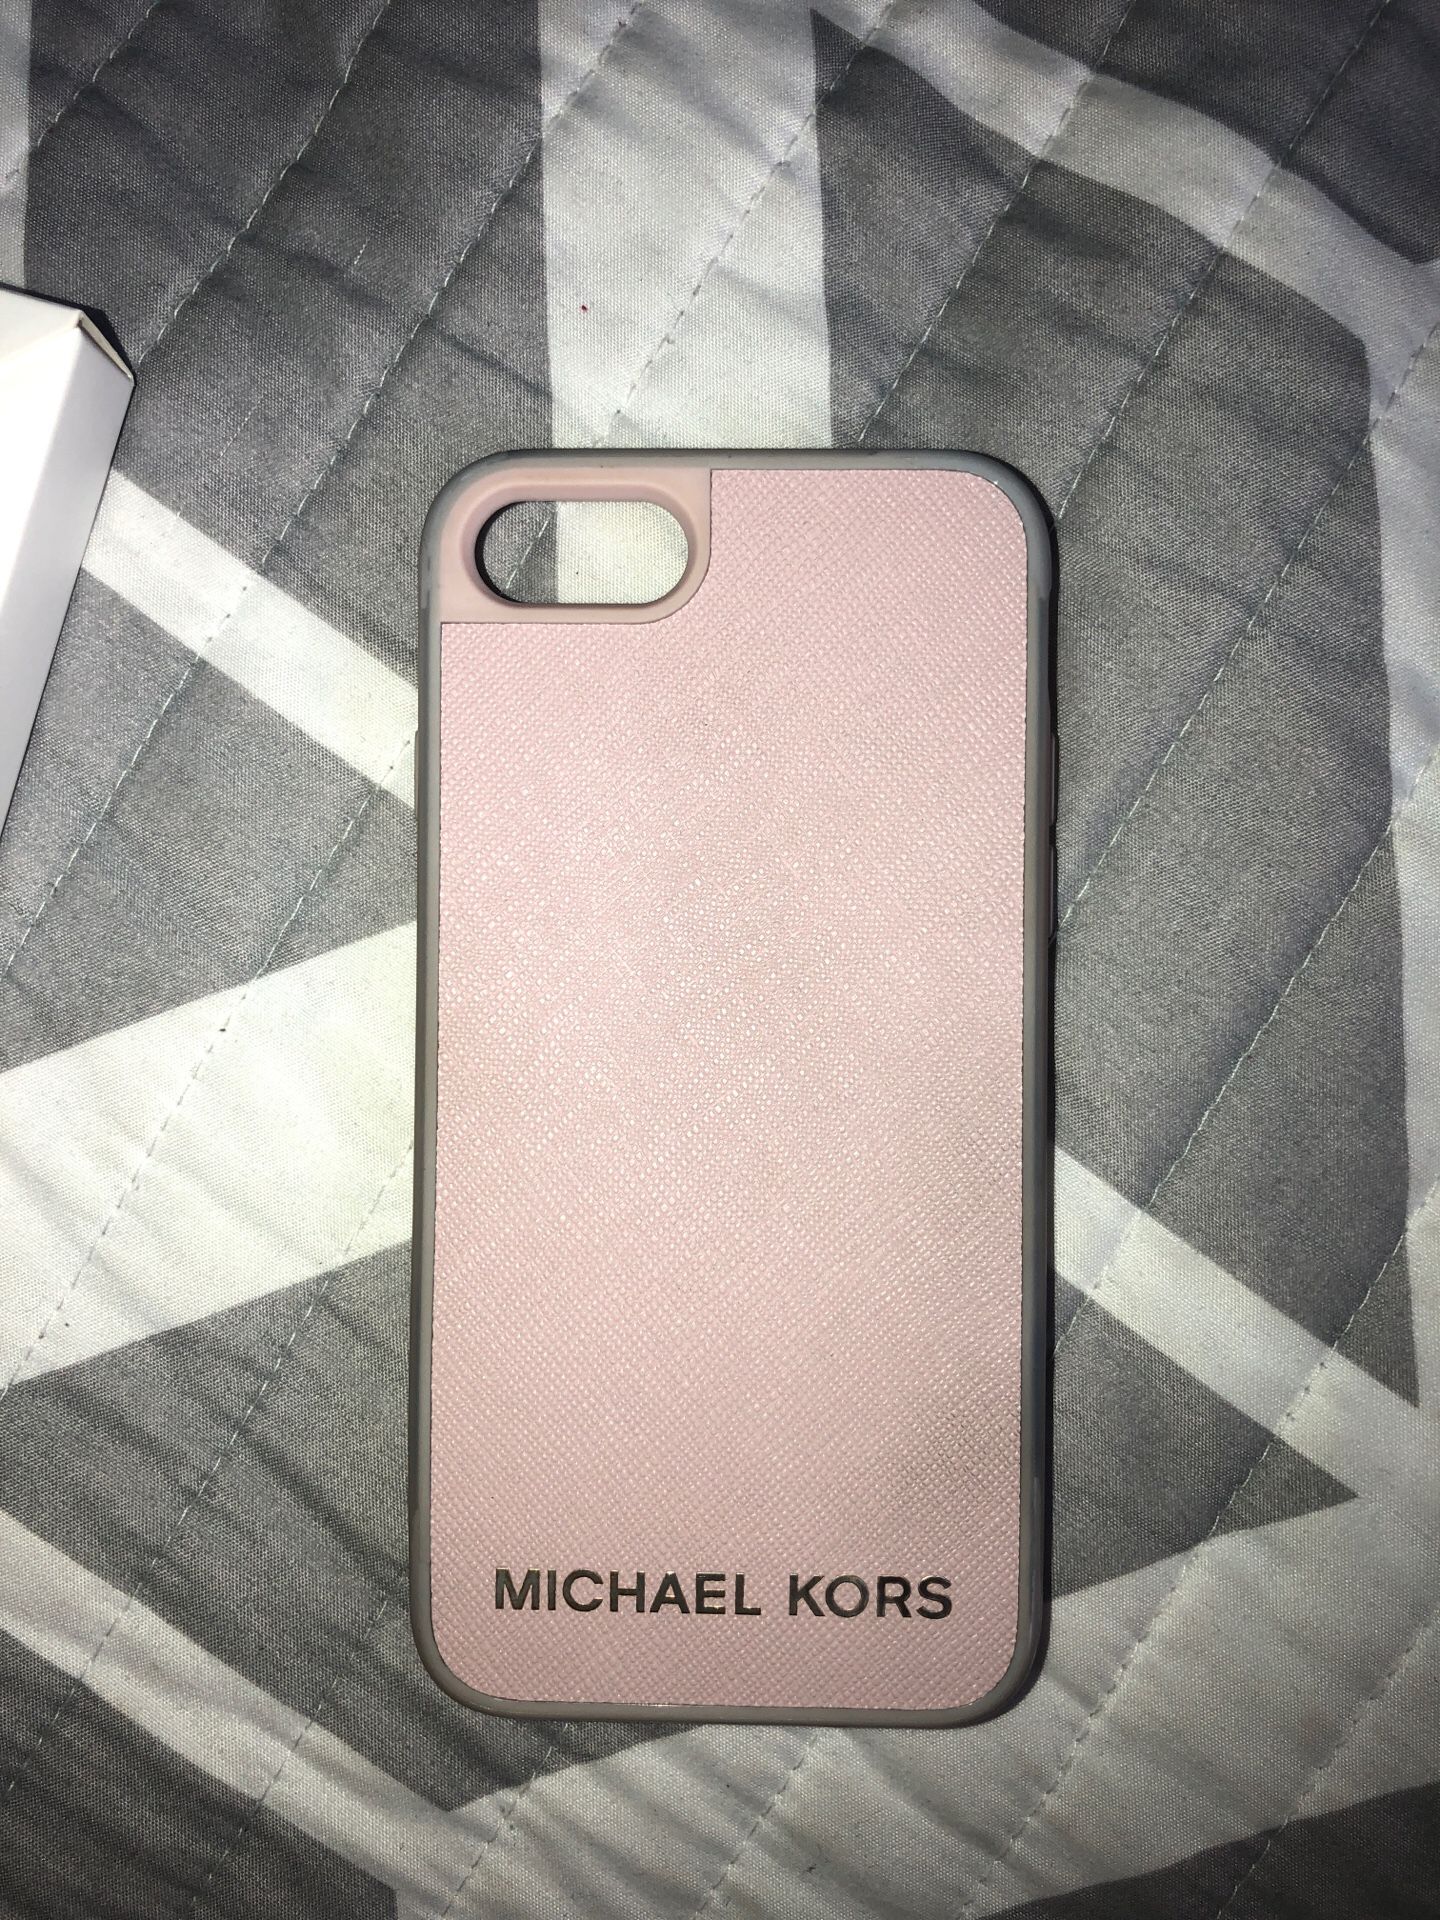 Michael Kors iPhone 6,7,8 case for Sale in Corona, CA - OfferUp